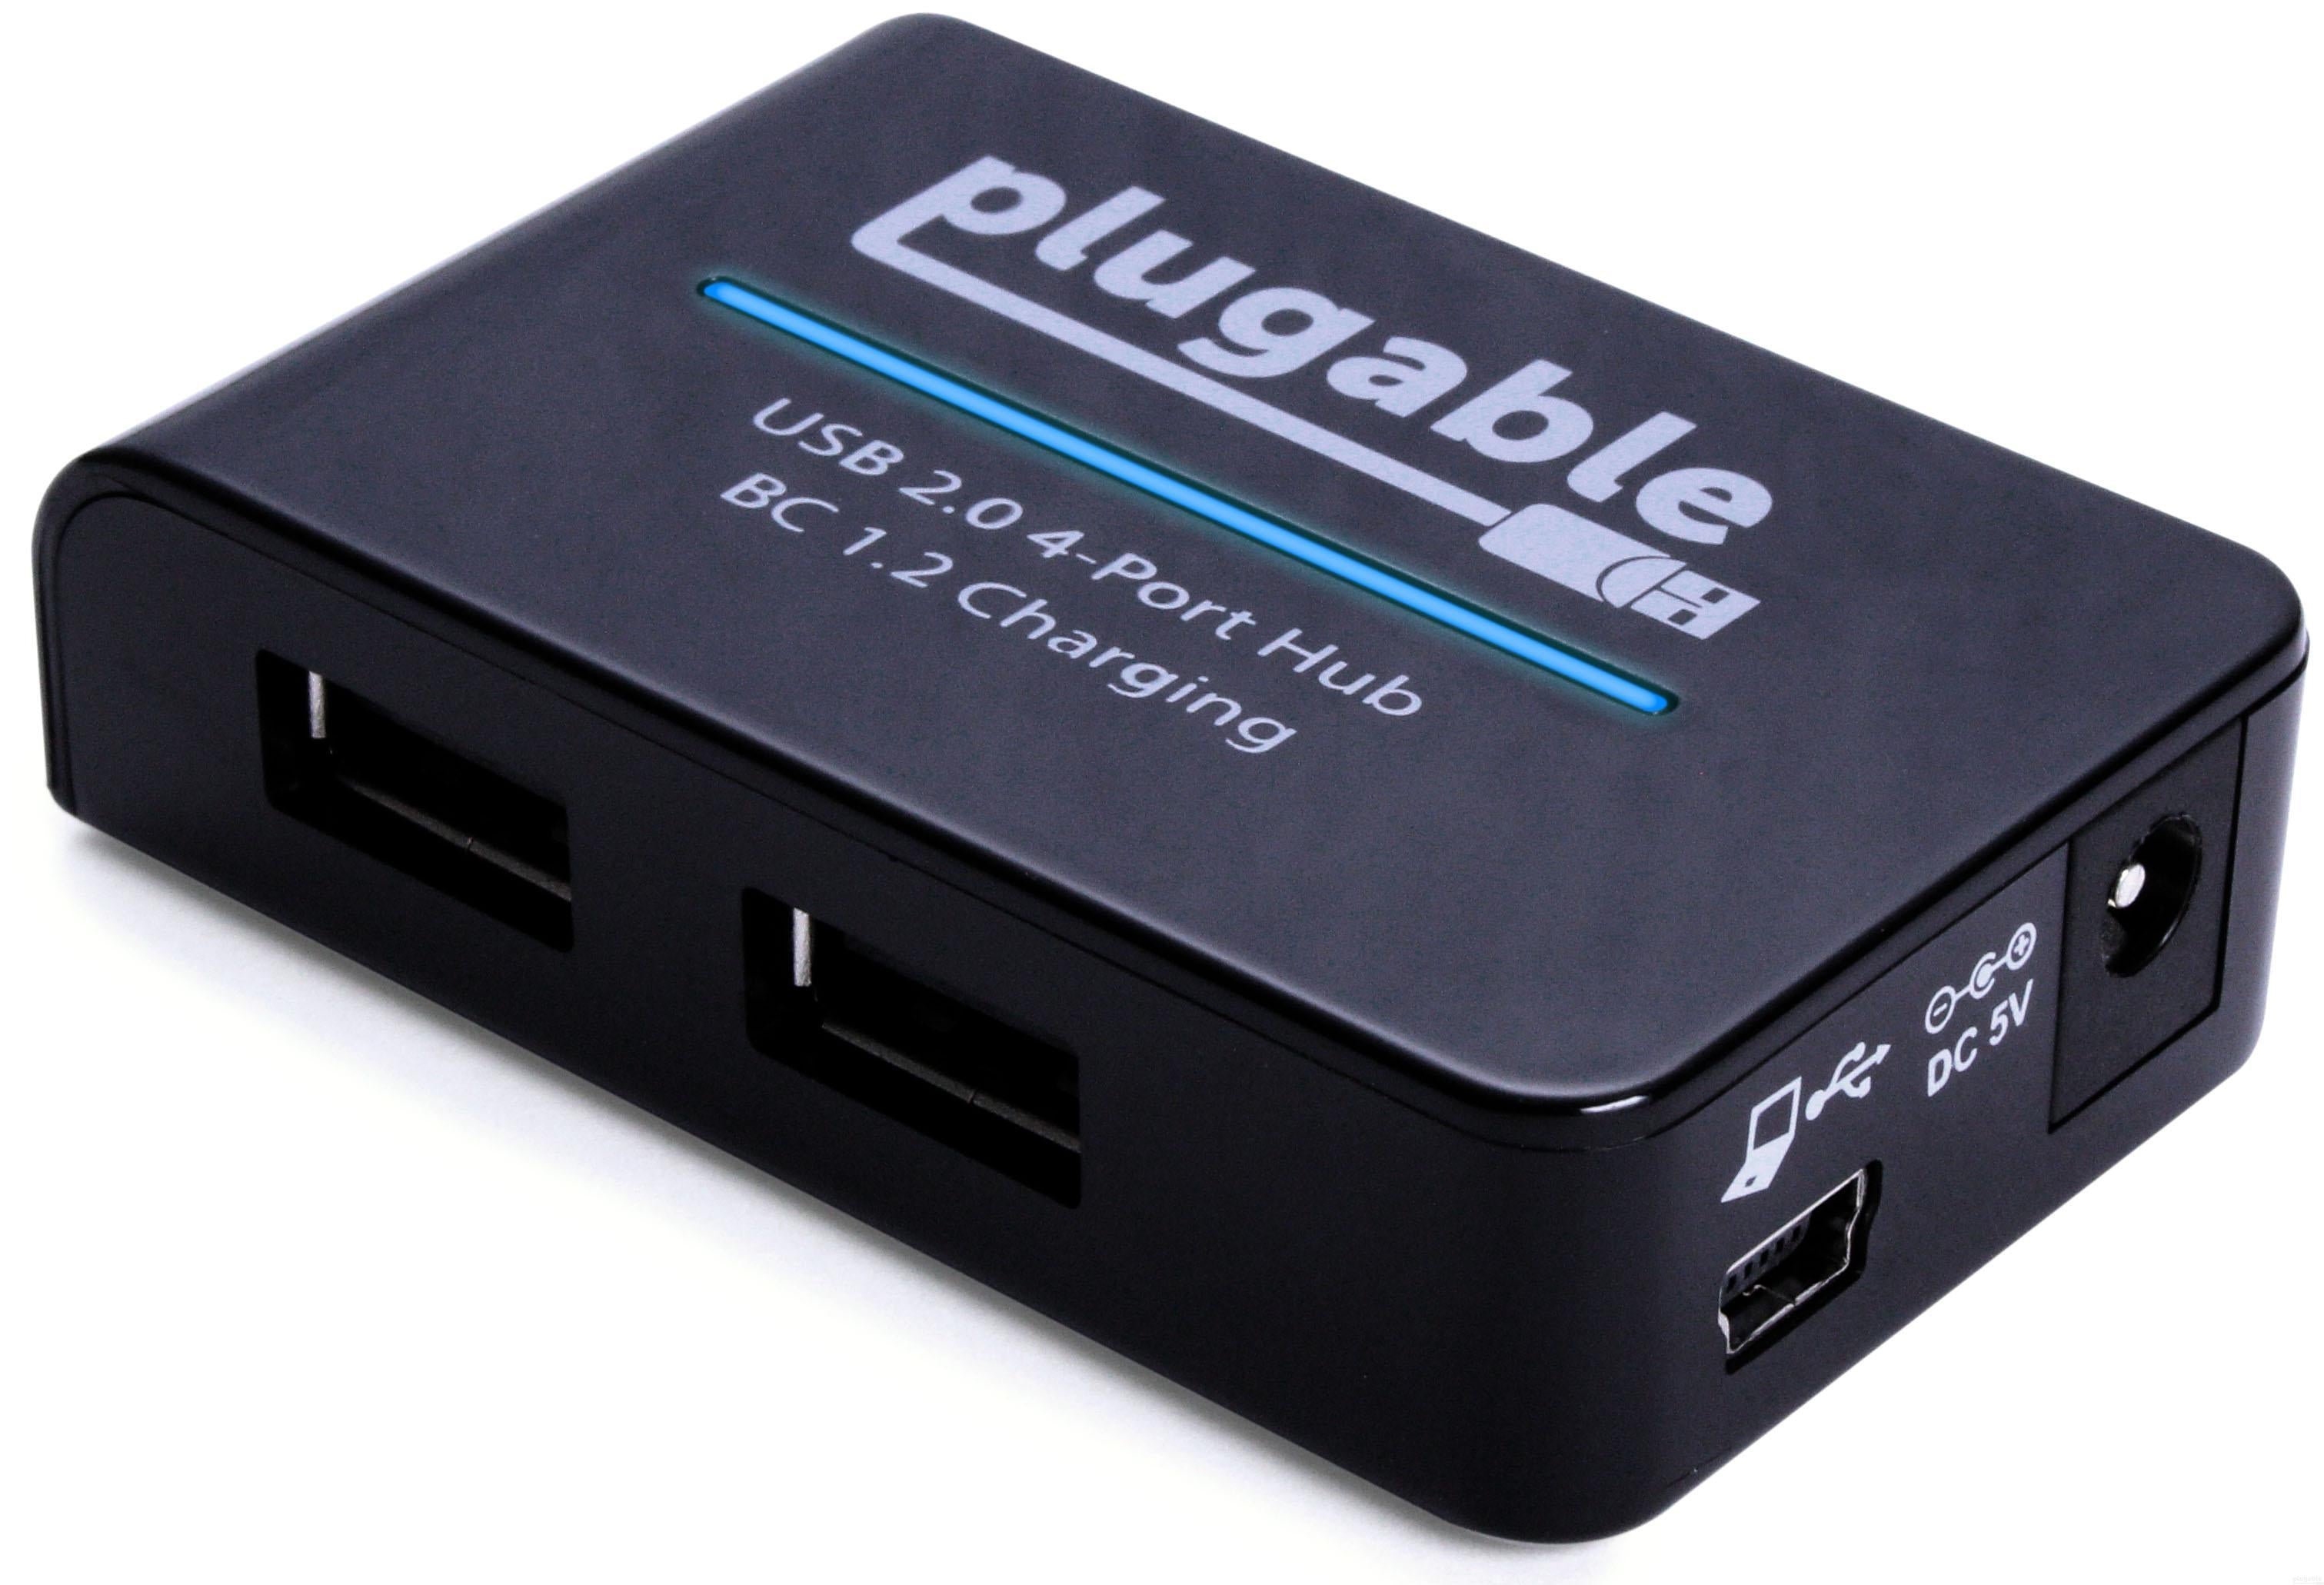 USB 2.0 Hub with 12.5W Power Adapter with BC 1.2 – Plugable Technologies